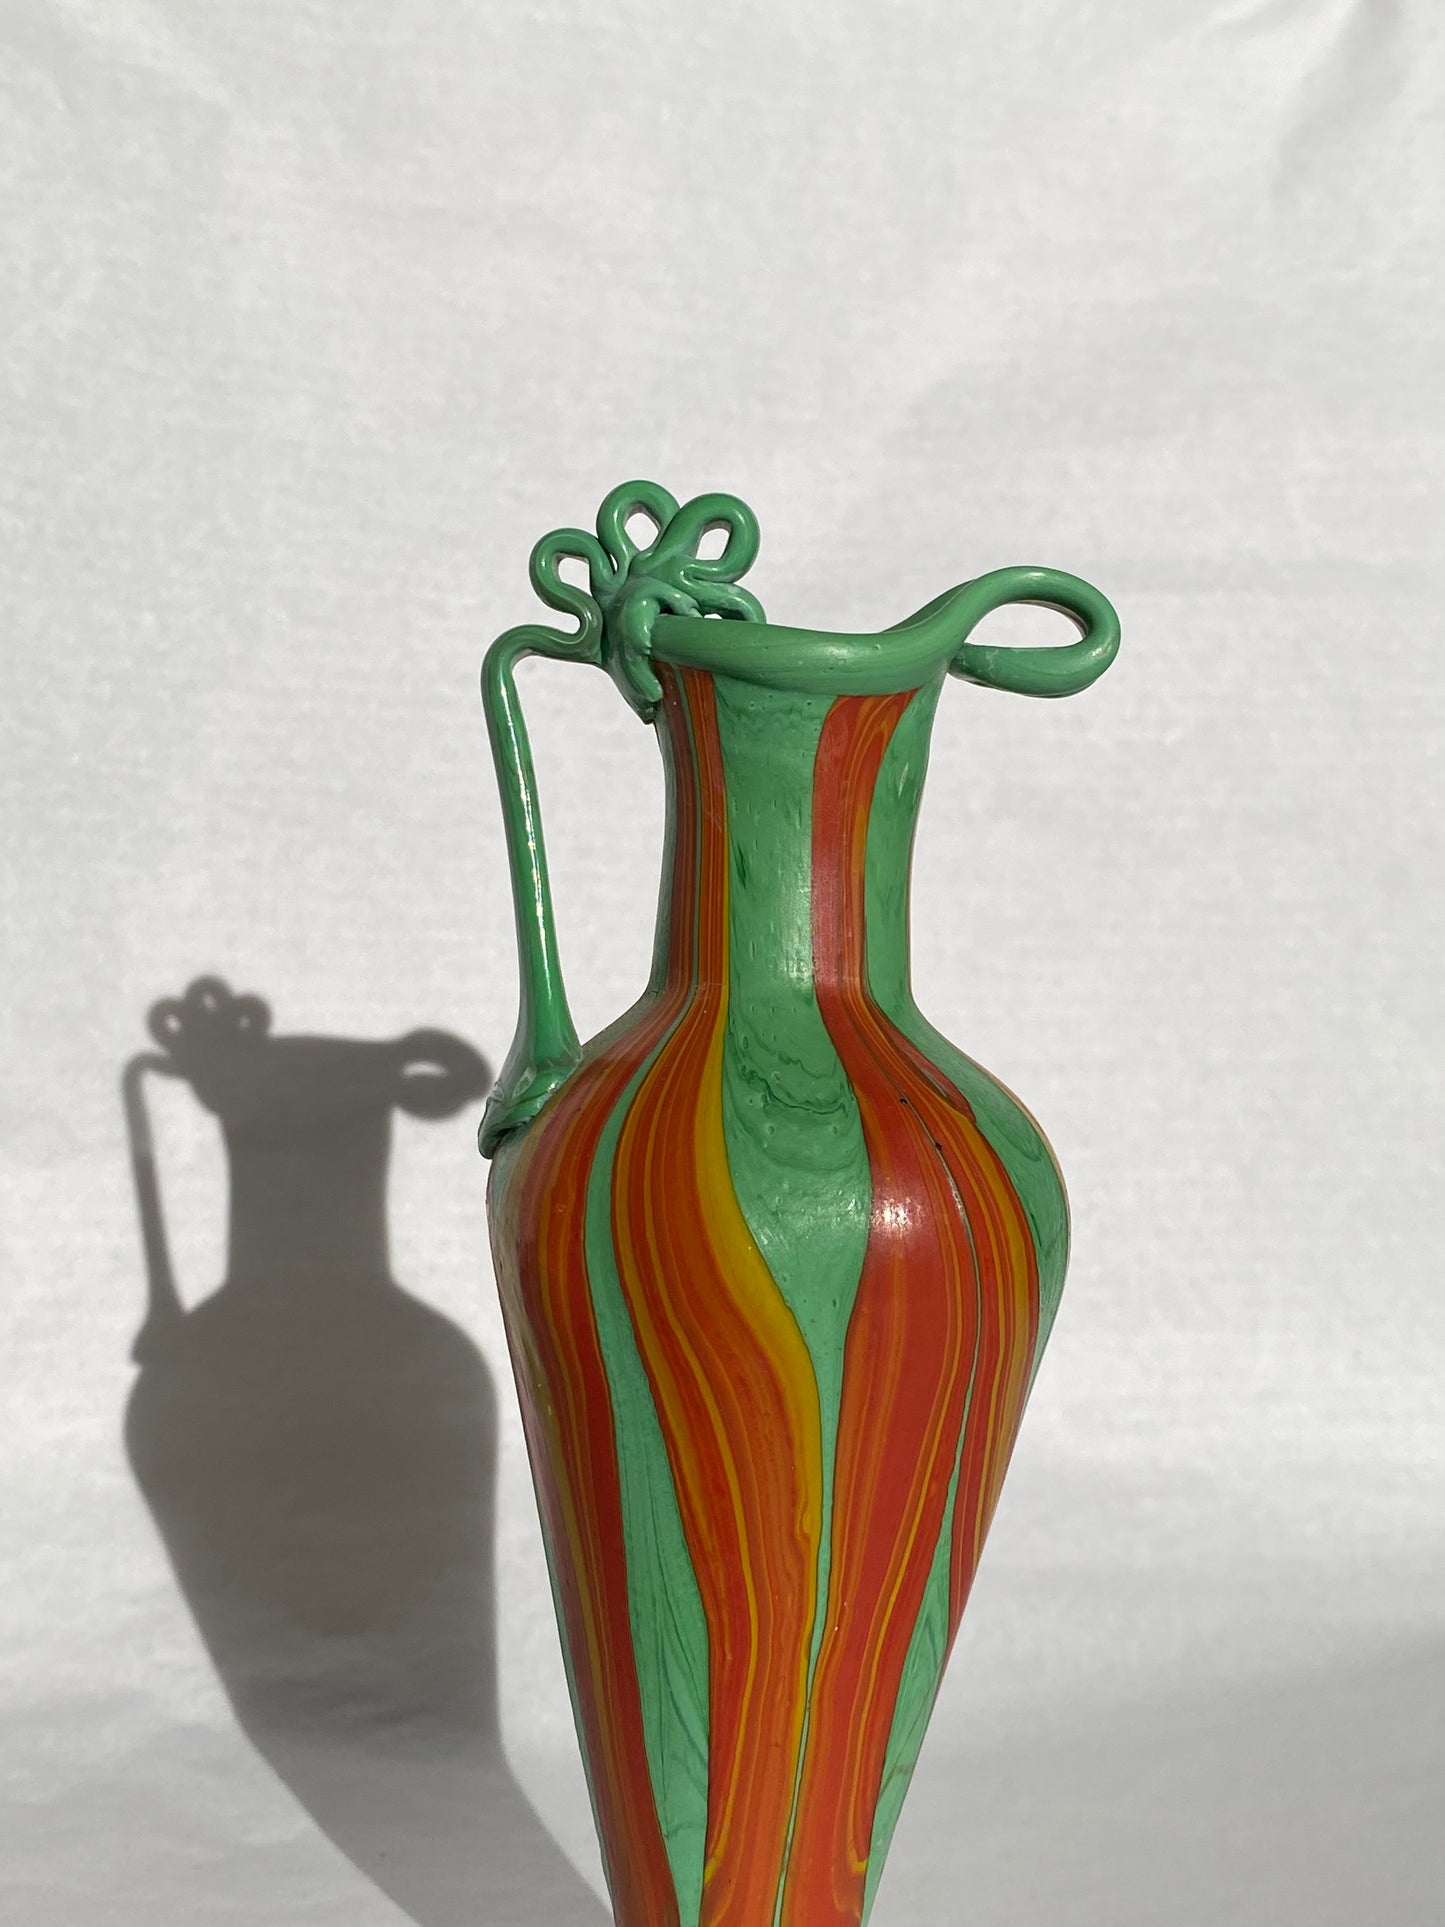 Phoenician glass vase - green, orange and red